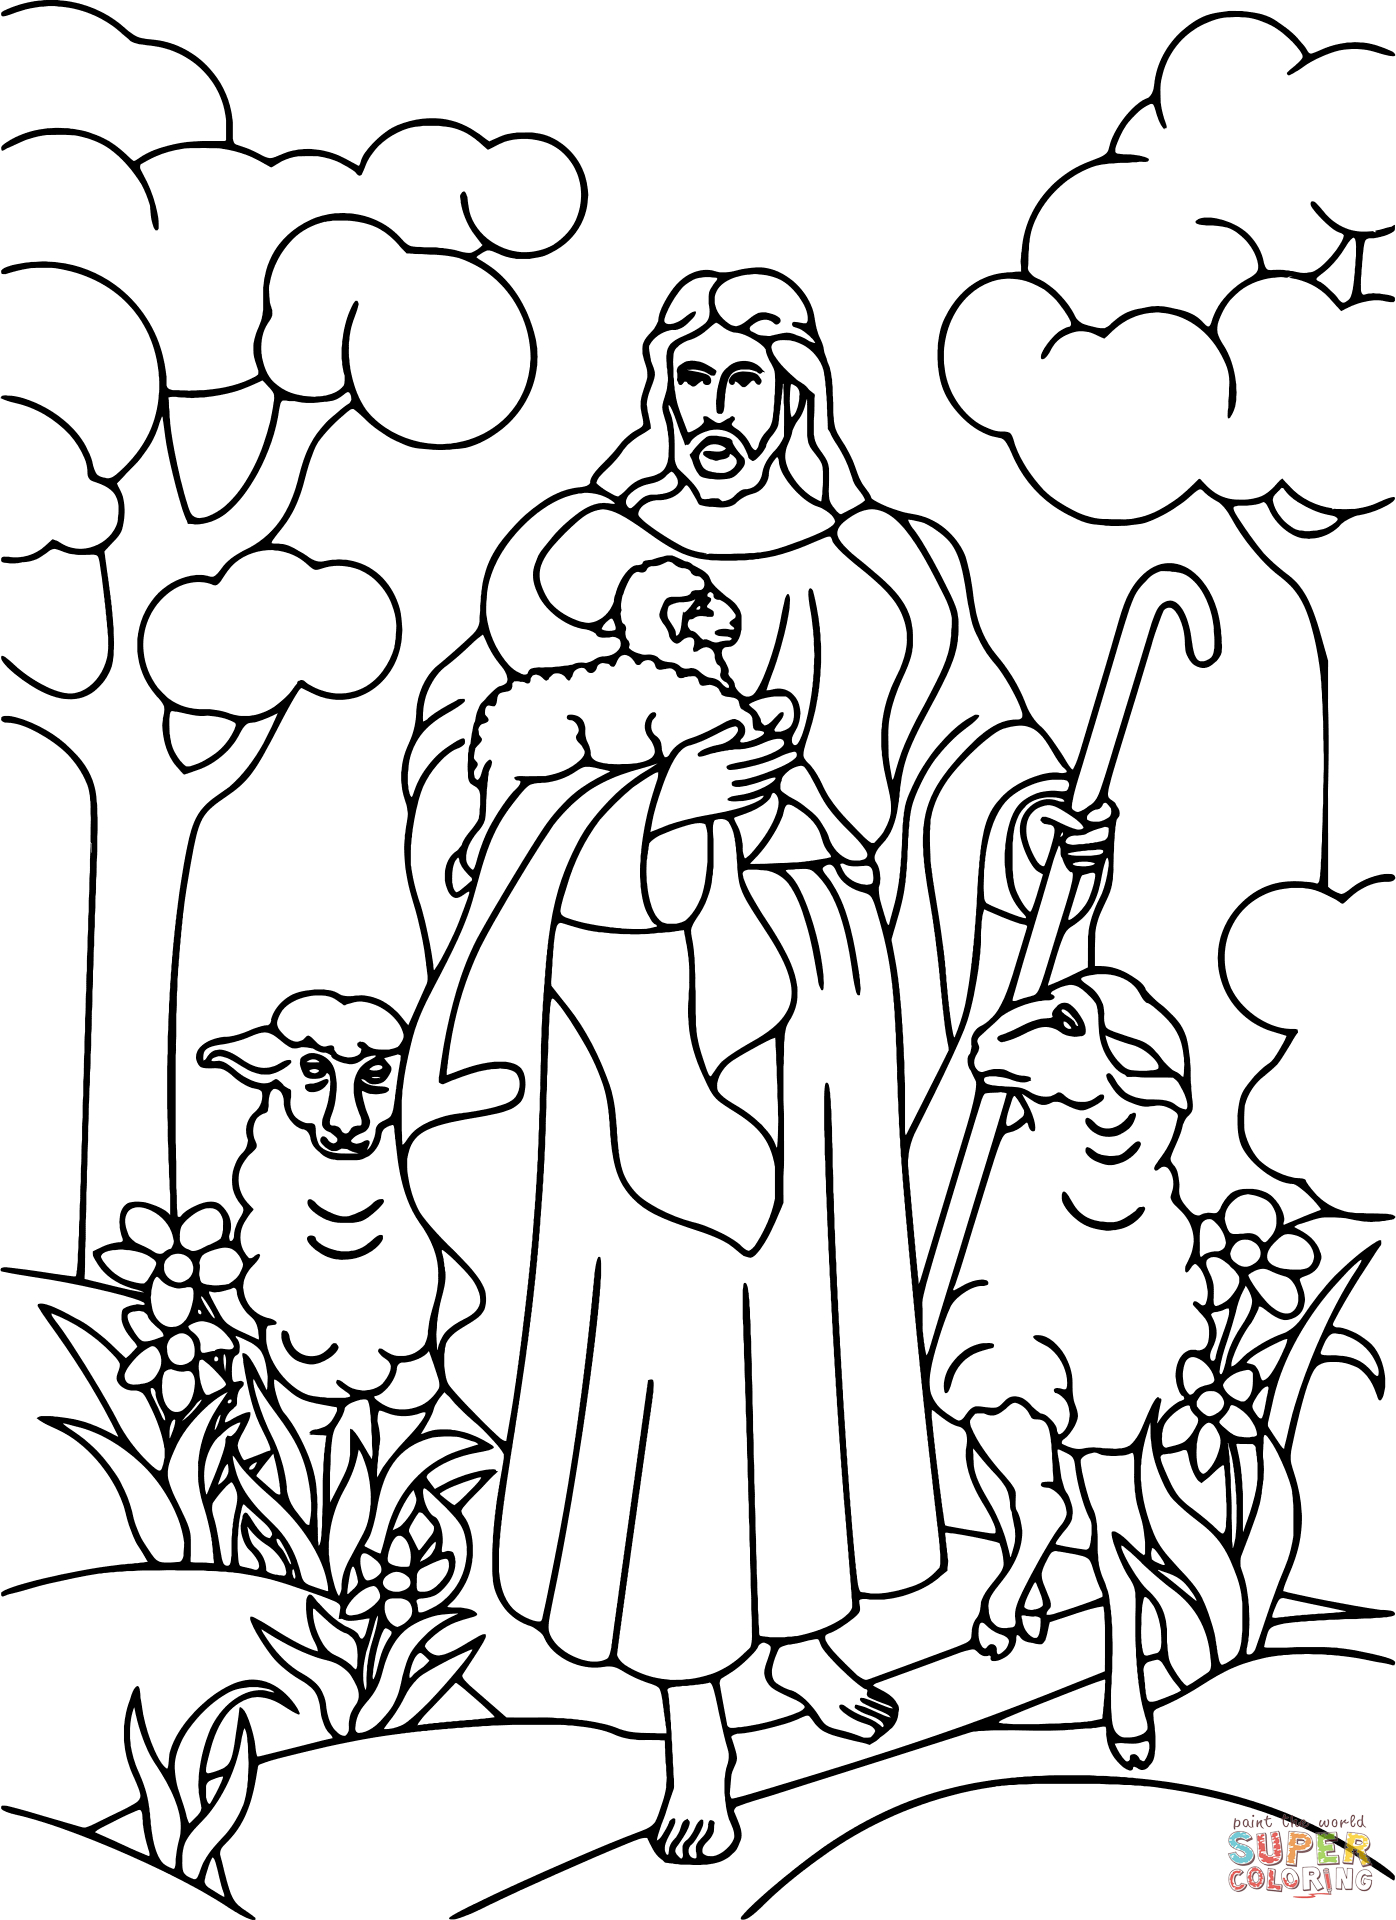 Coloring Pages Sheep And The Shepherd Jesus Holding Lamb Coloring Page Free Printable Coloring Pages